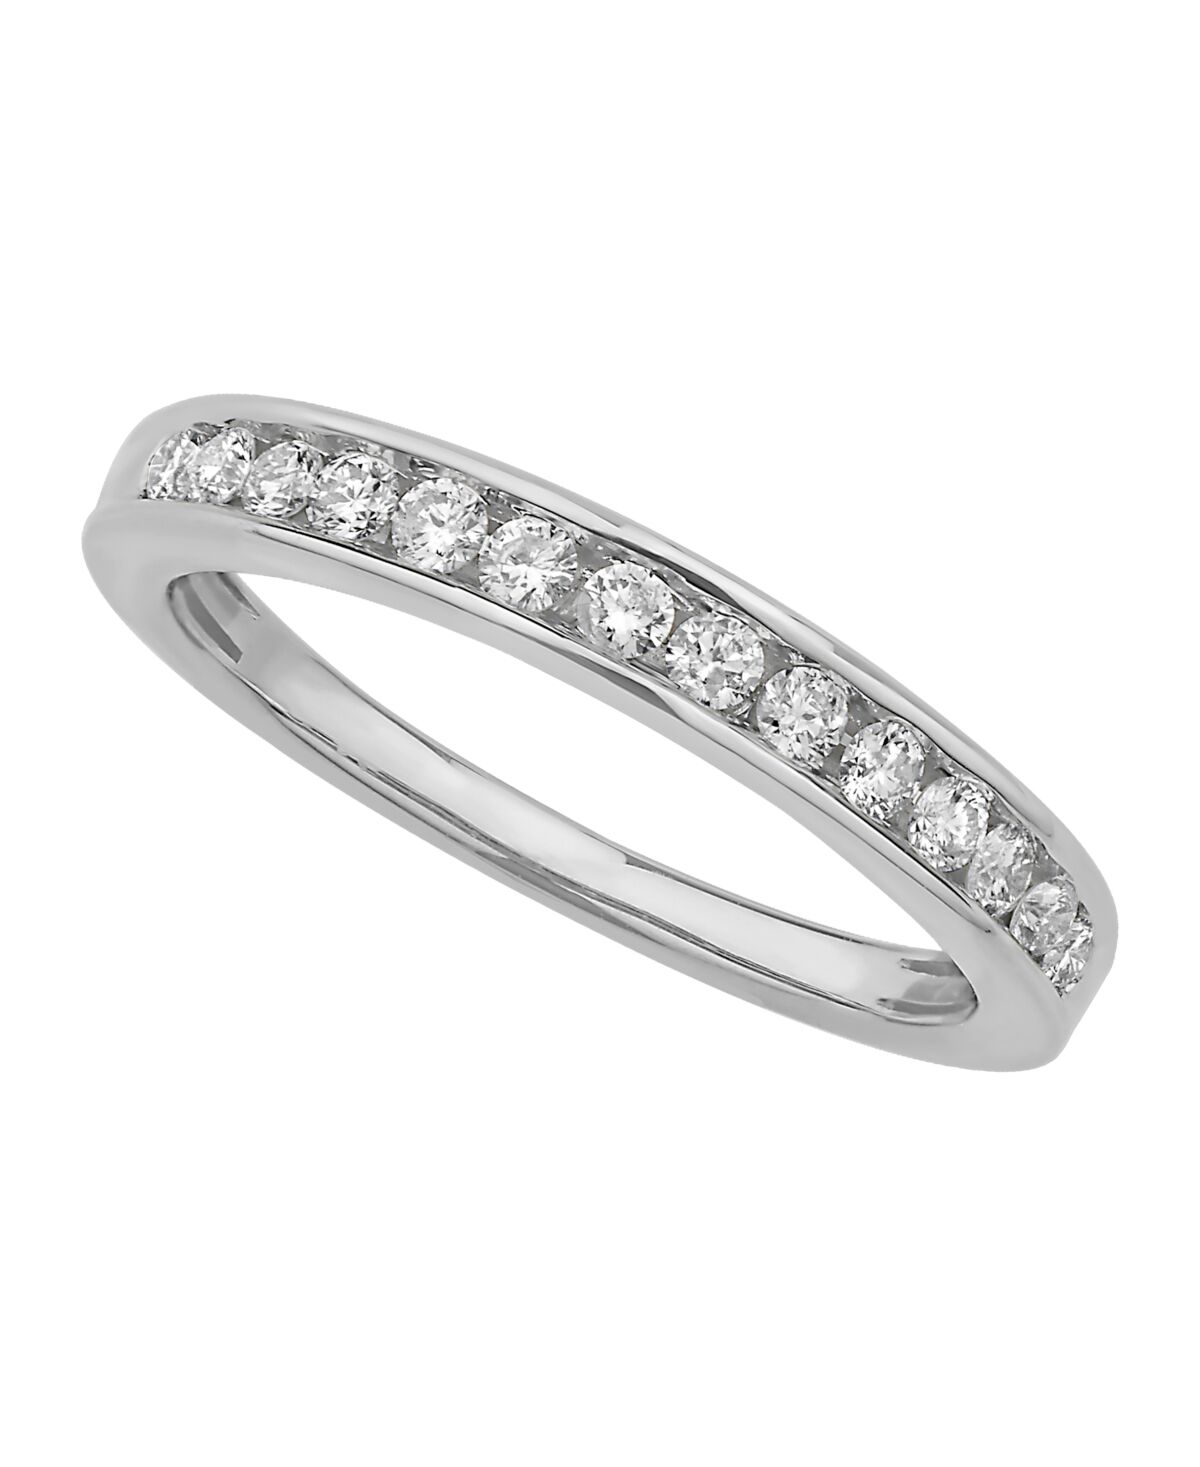 Macy's Certified Diamond Channel Band 1/4 ct. t.w. in 14k White or Yellow Gold - White Gold